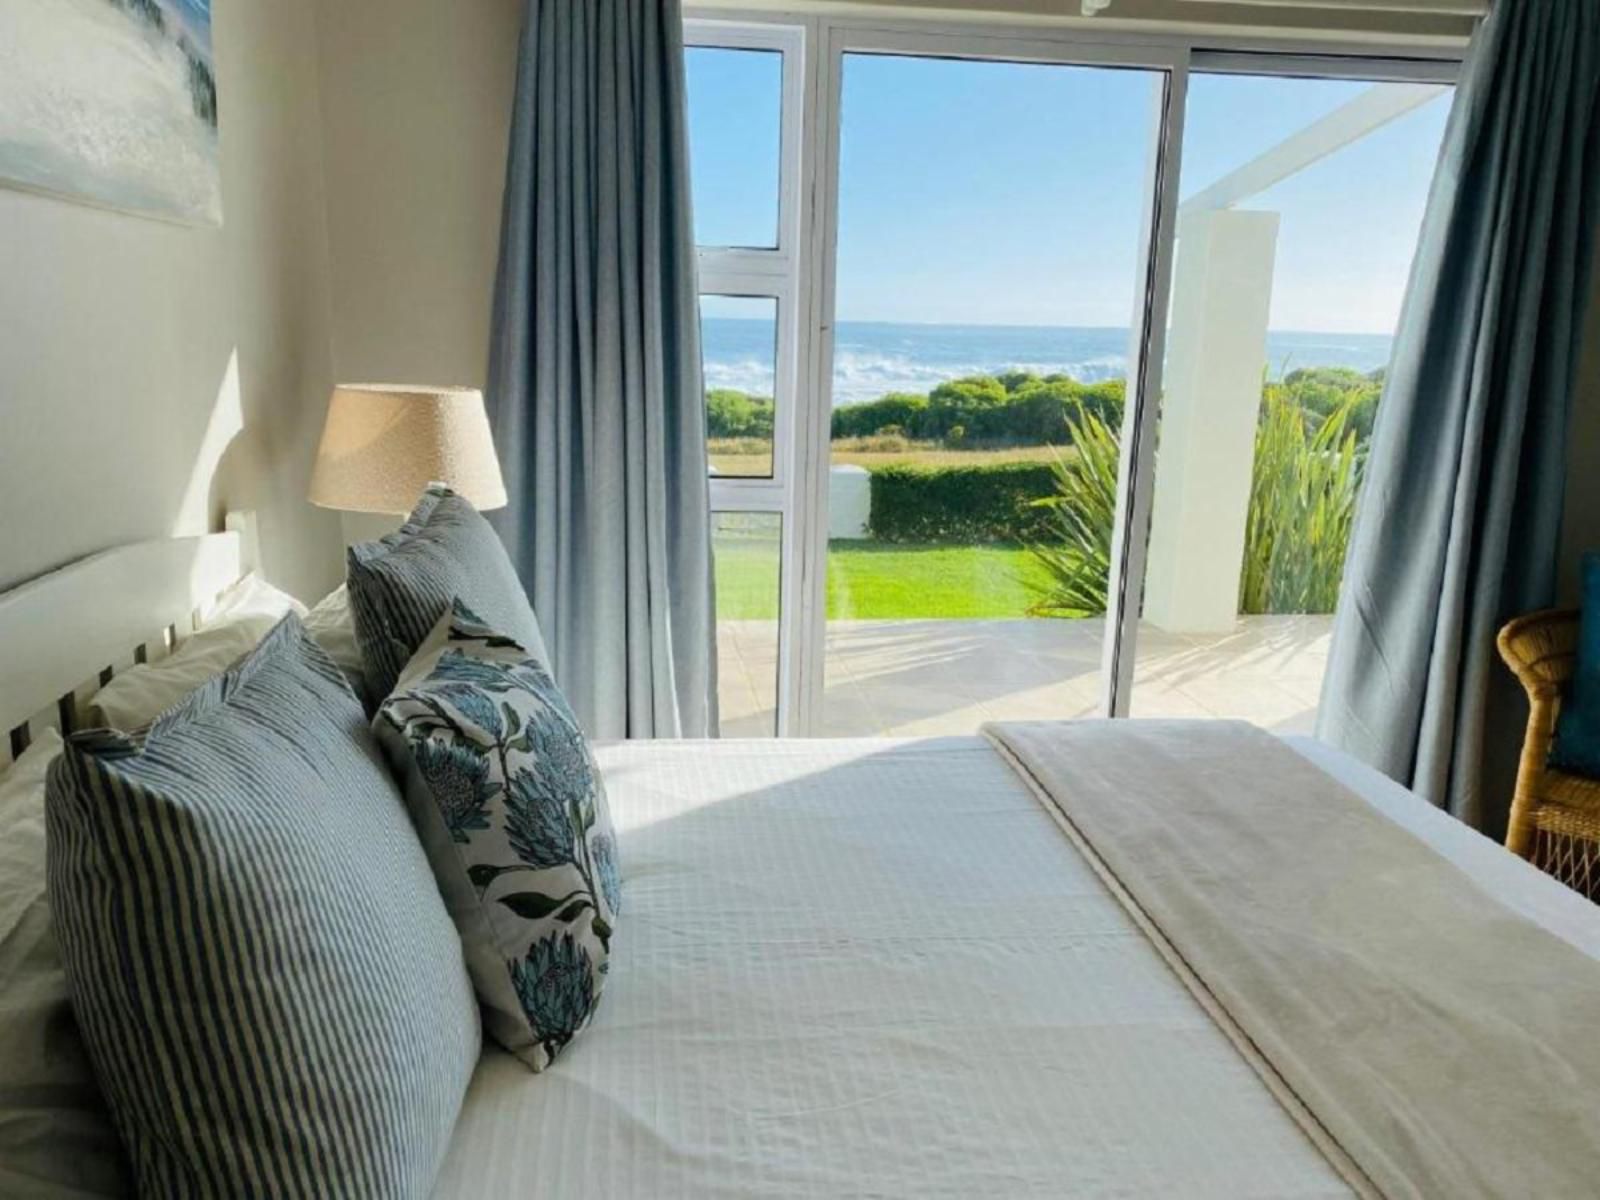 Shores Edge Cottage And Seapearl Ocean Front Villa Onrus Hermanus Western Cape South Africa Bedroom